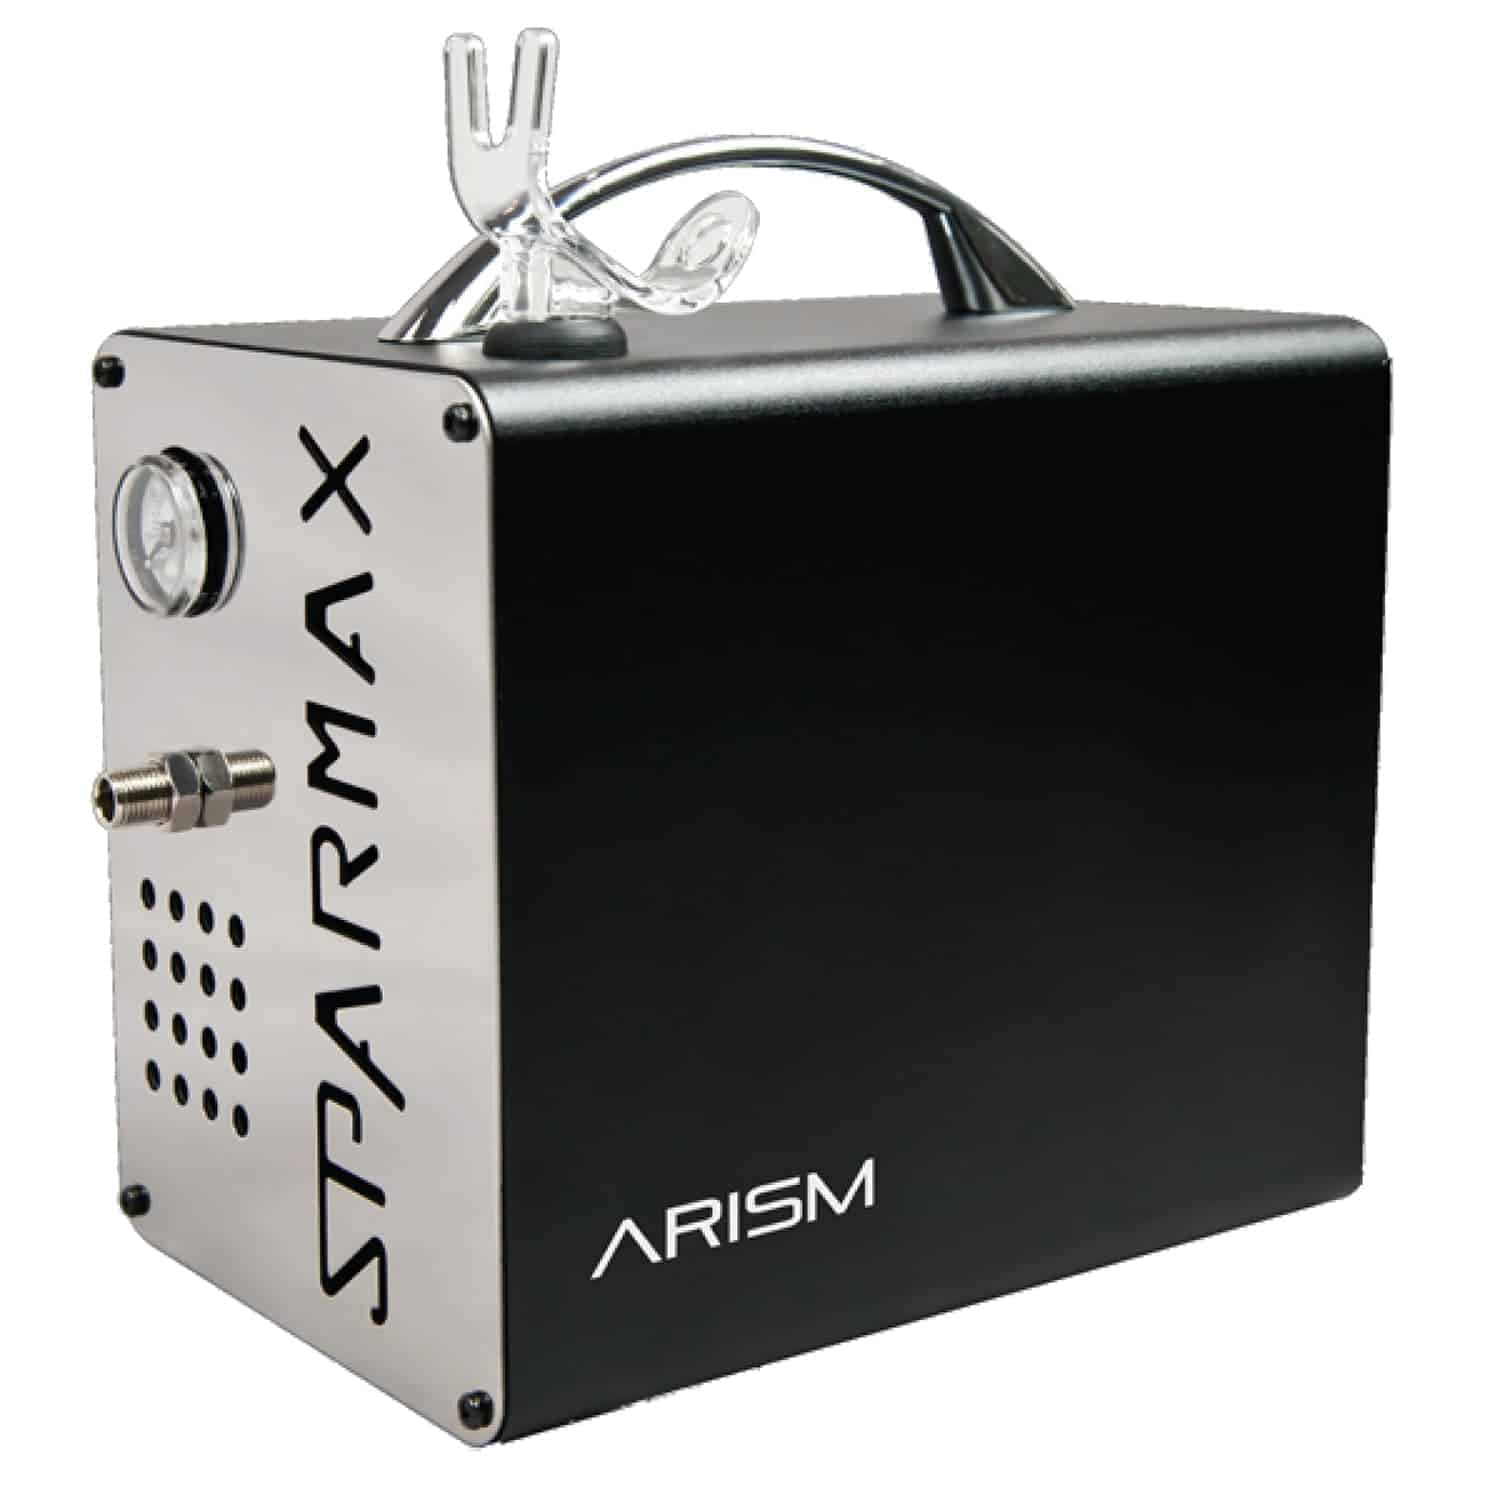  Sparmax  ARISM Compressor for Airbrush  Artists GraphicAir